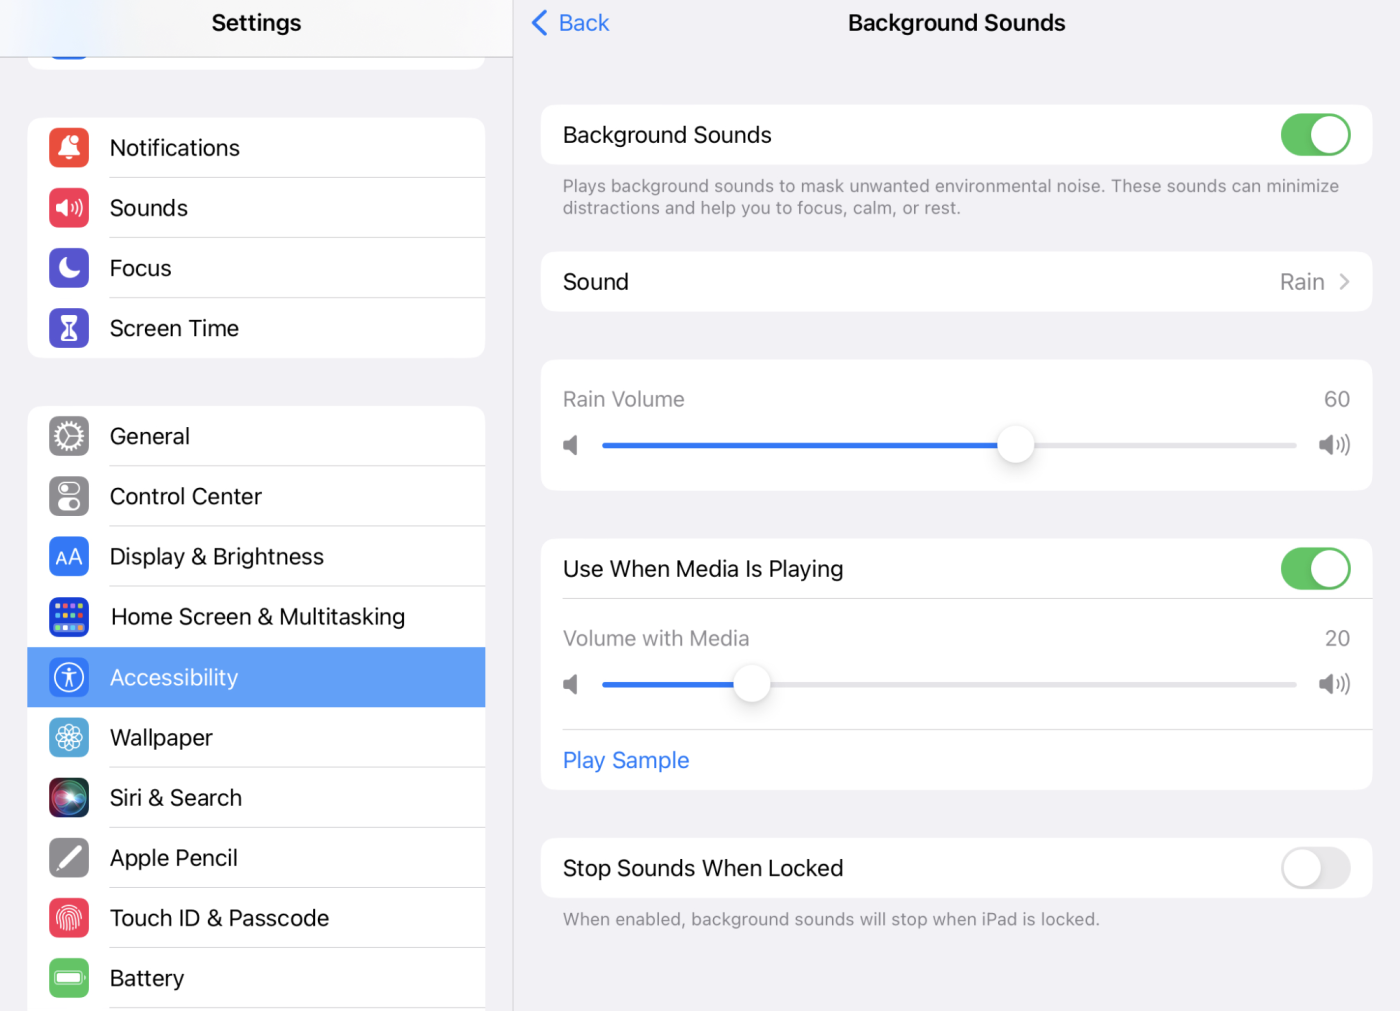 Enabling background sounds on iPad